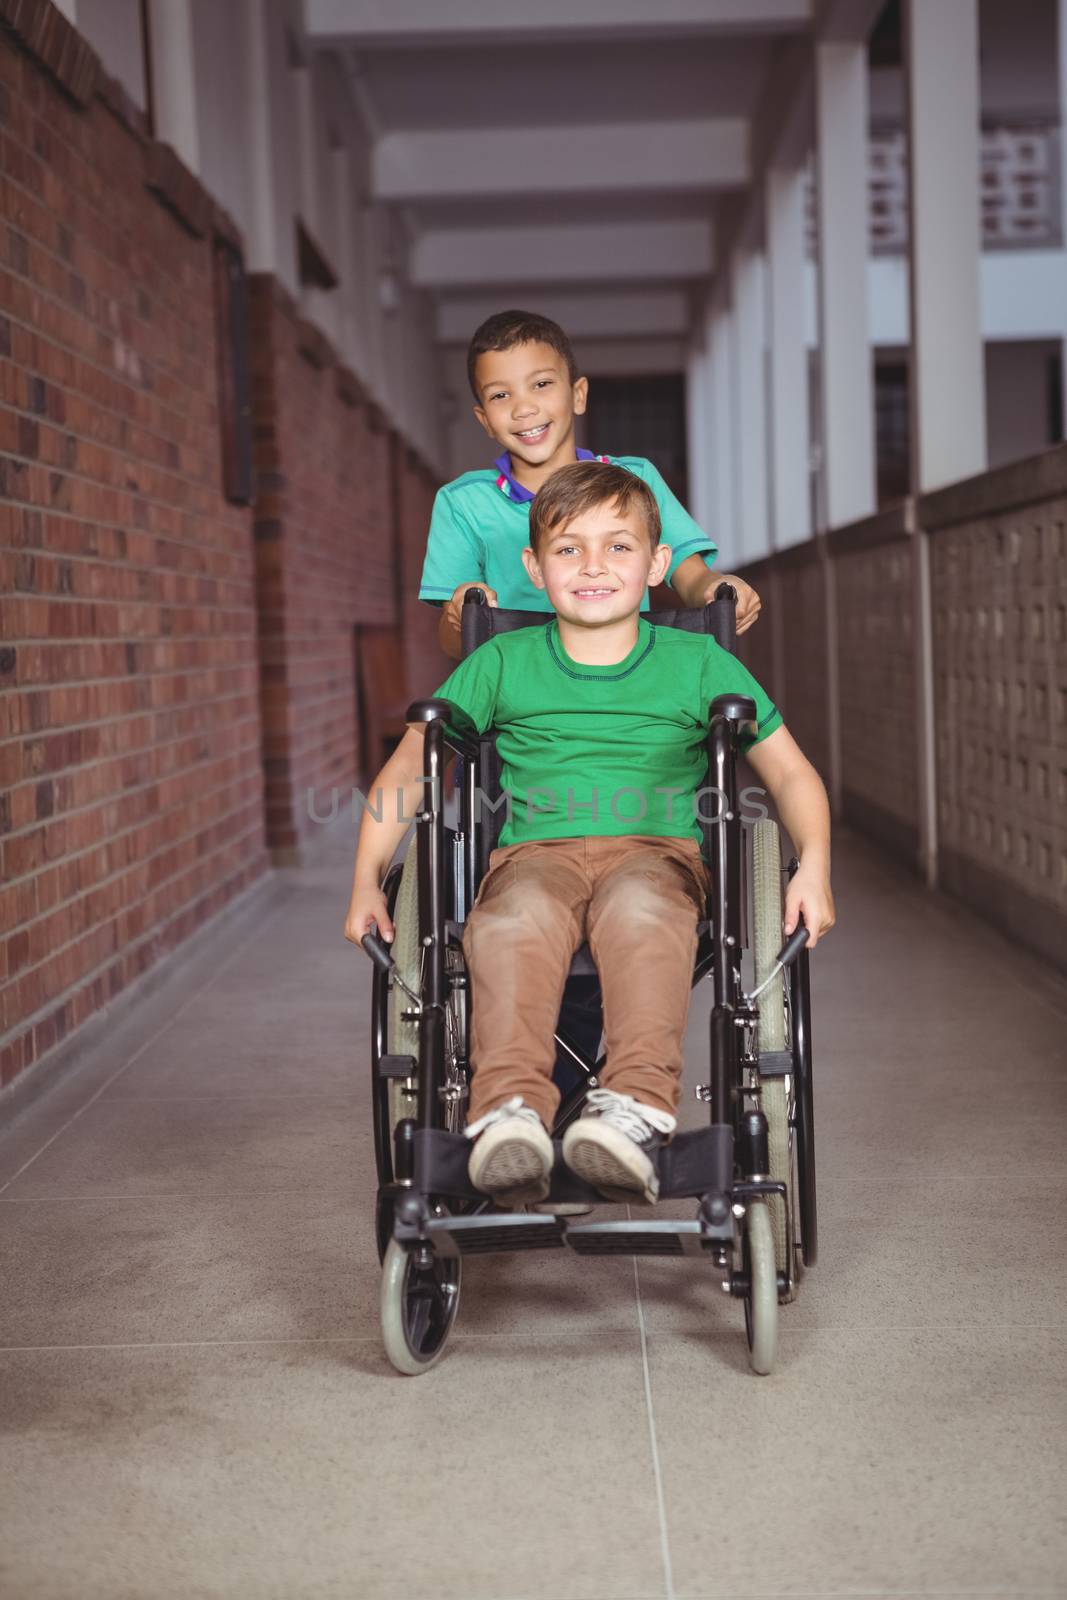 Smiling student in a wheelchair and friend pushing on the elementary school grounds